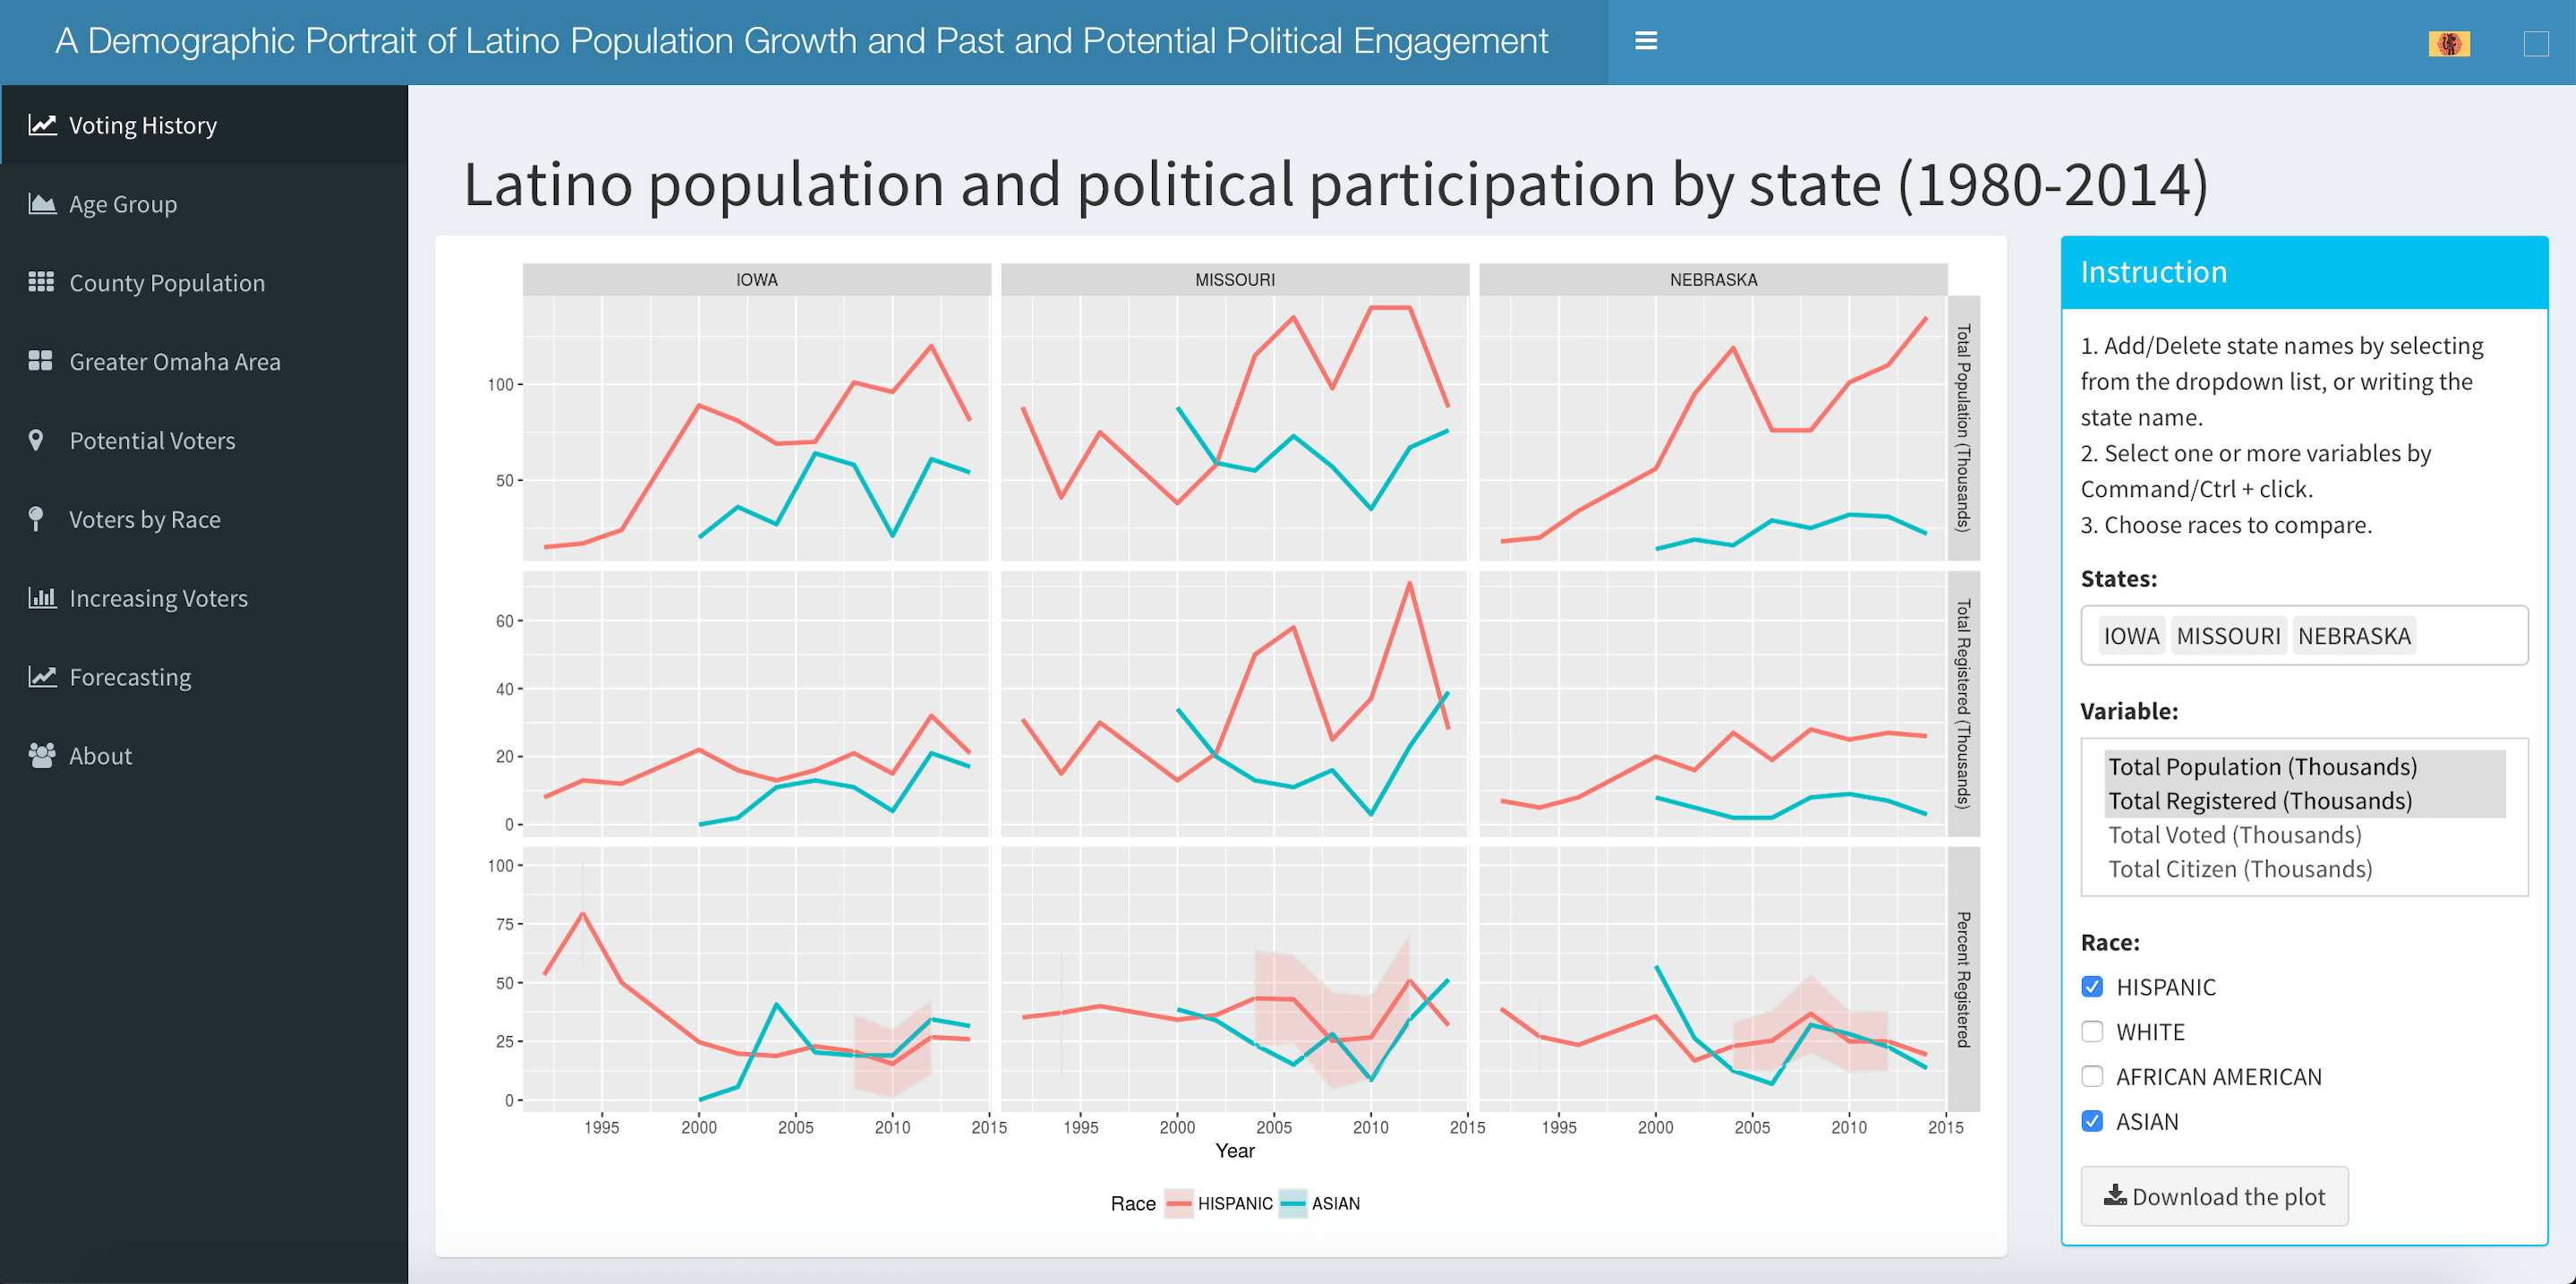 A Demographic Portrait of Latino Population Growth and Past and Potential Political Engagement